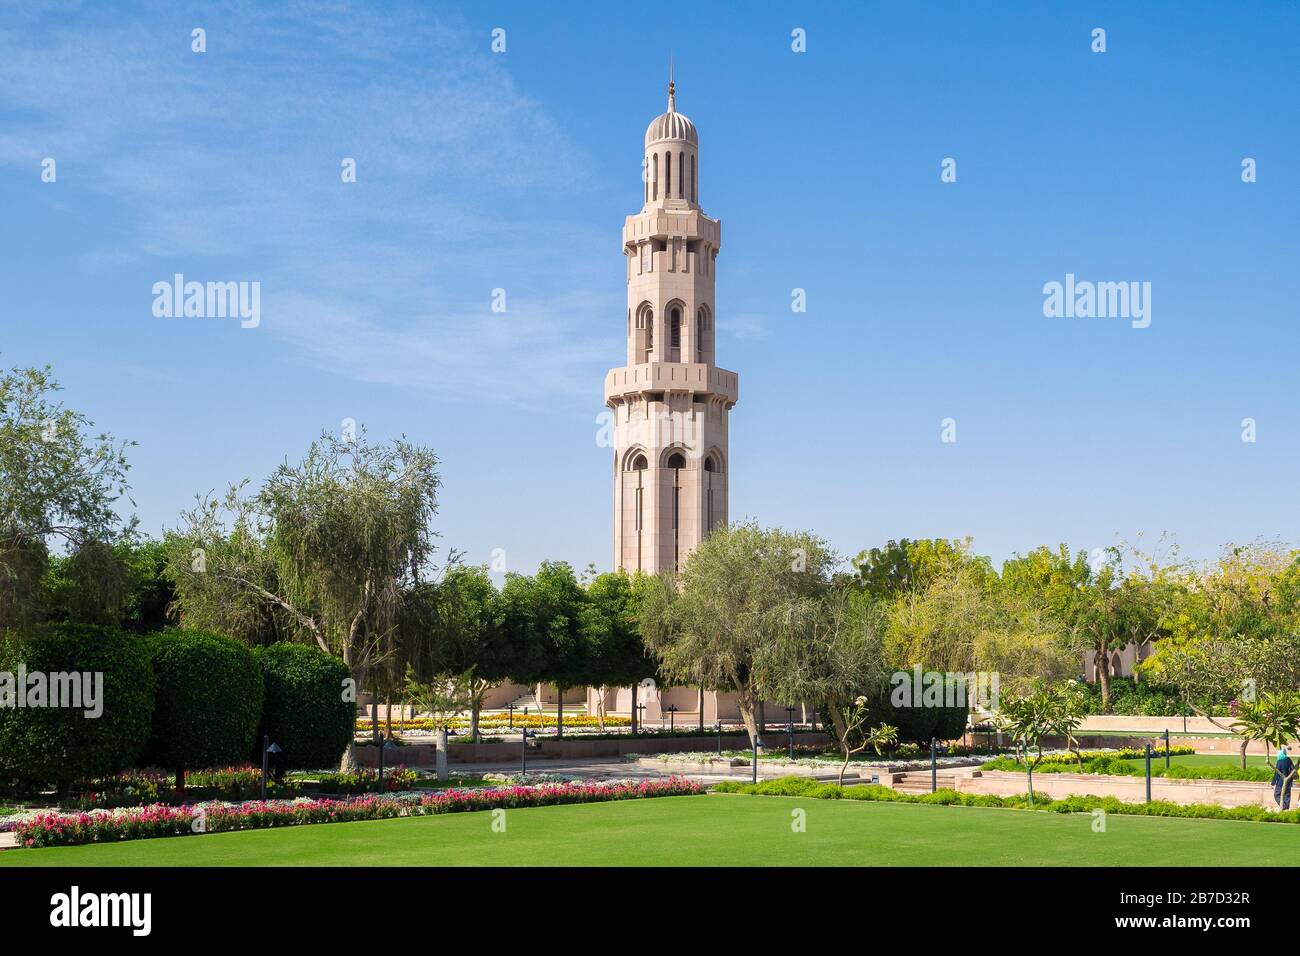 One of the minarets of Sultan Qaboos Grand Mosque in Muscat, Oman sultanate Stock Photo